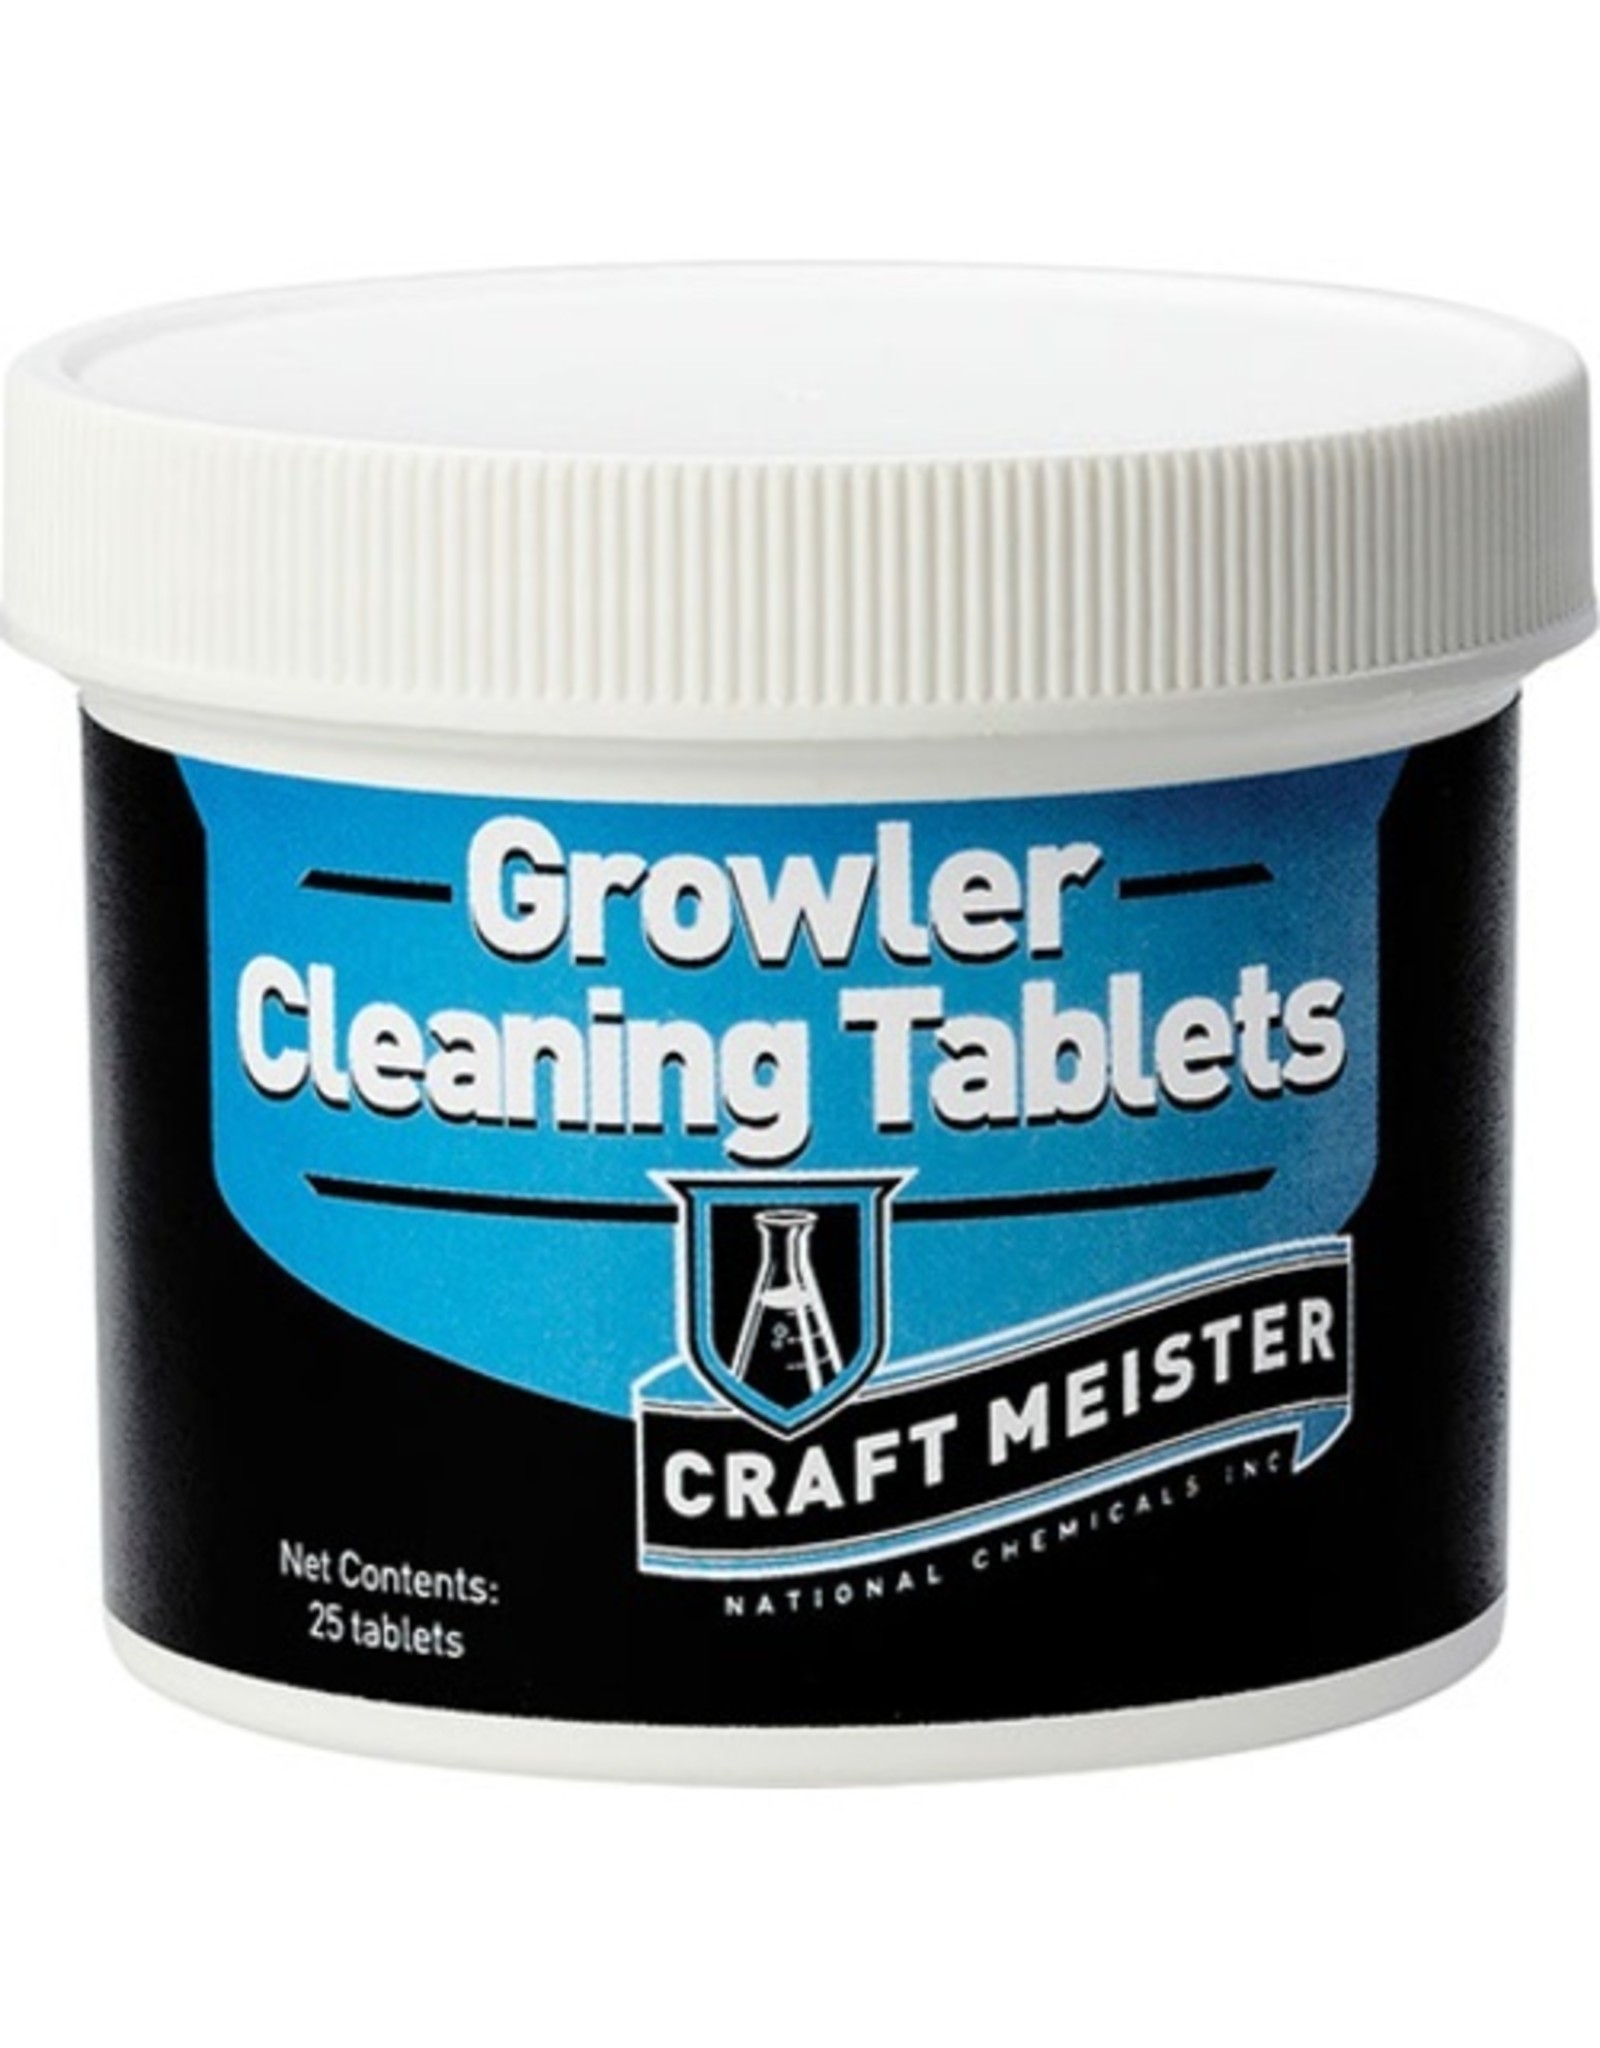 Craftmeister Cleaning Tablets Growler 25ct